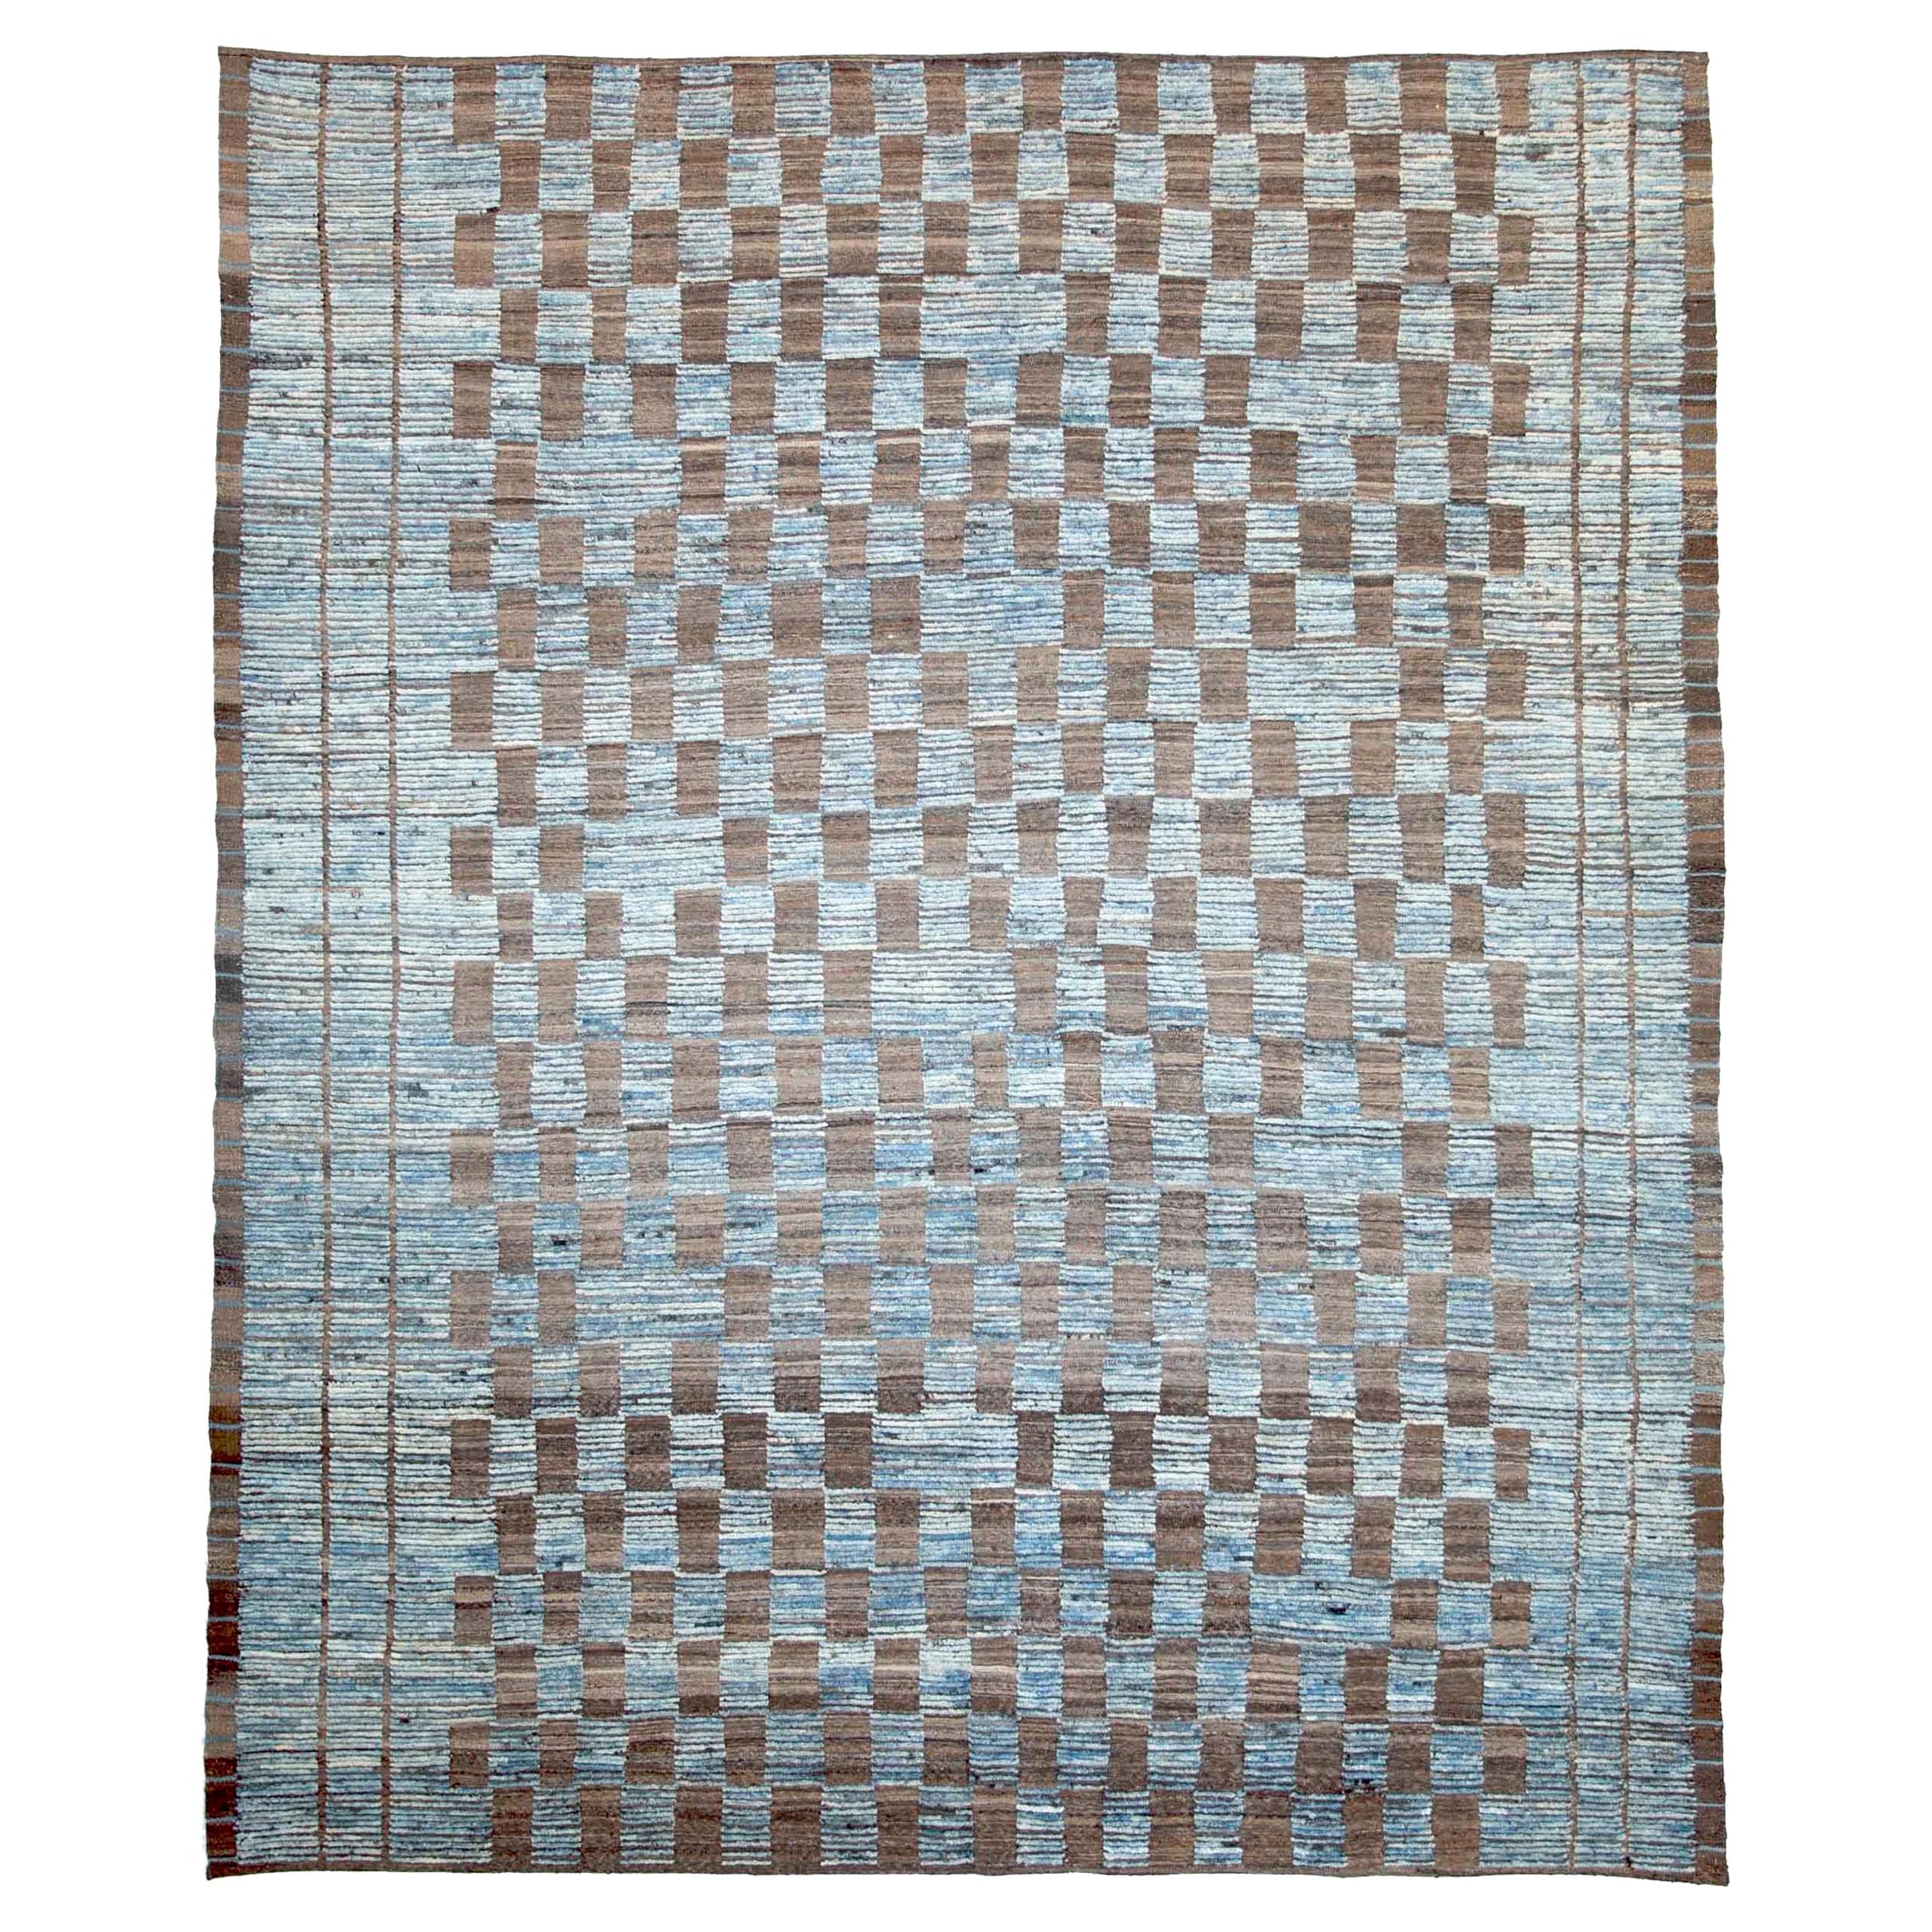 Modern Afghan Moroccan Style Rug with Brown Tile Details on Blue Field